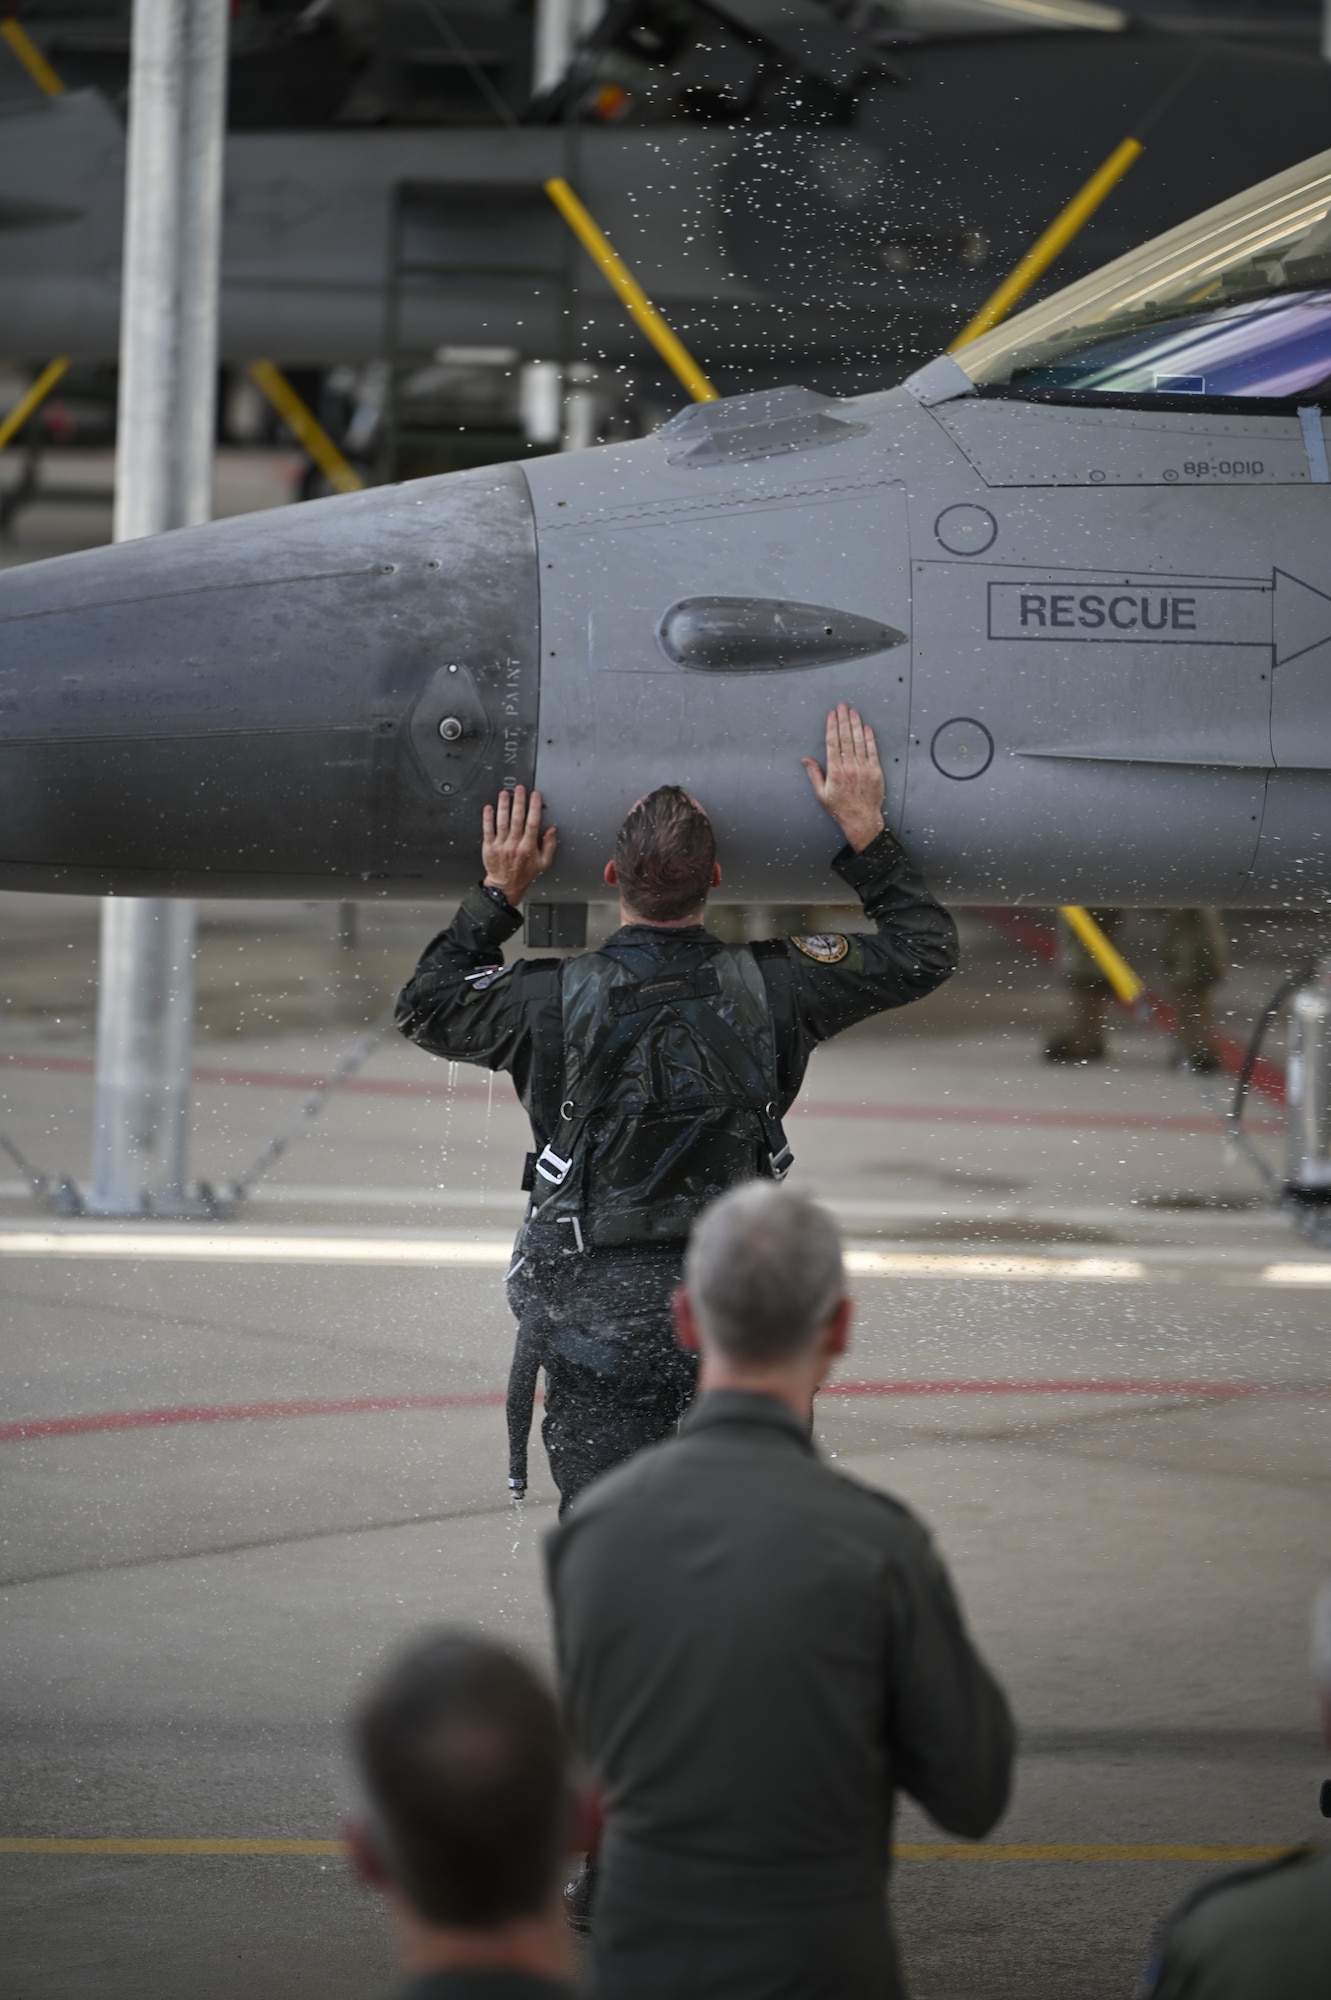 Lt. Col. Joost Luijsterburg, the Royal Netherlands Air Force detachment commander, kisses a Dutch F-16 at the Morris Air National Guard Base after his final flight in the jet. Luijsterburg has already assumed command of the Dutch F-35 detachment at Luke Air Force Base, Arizona, and has been acting as dual commander of both detachments. (U.S. Air National Guard photo by Maj. Angela Walz)